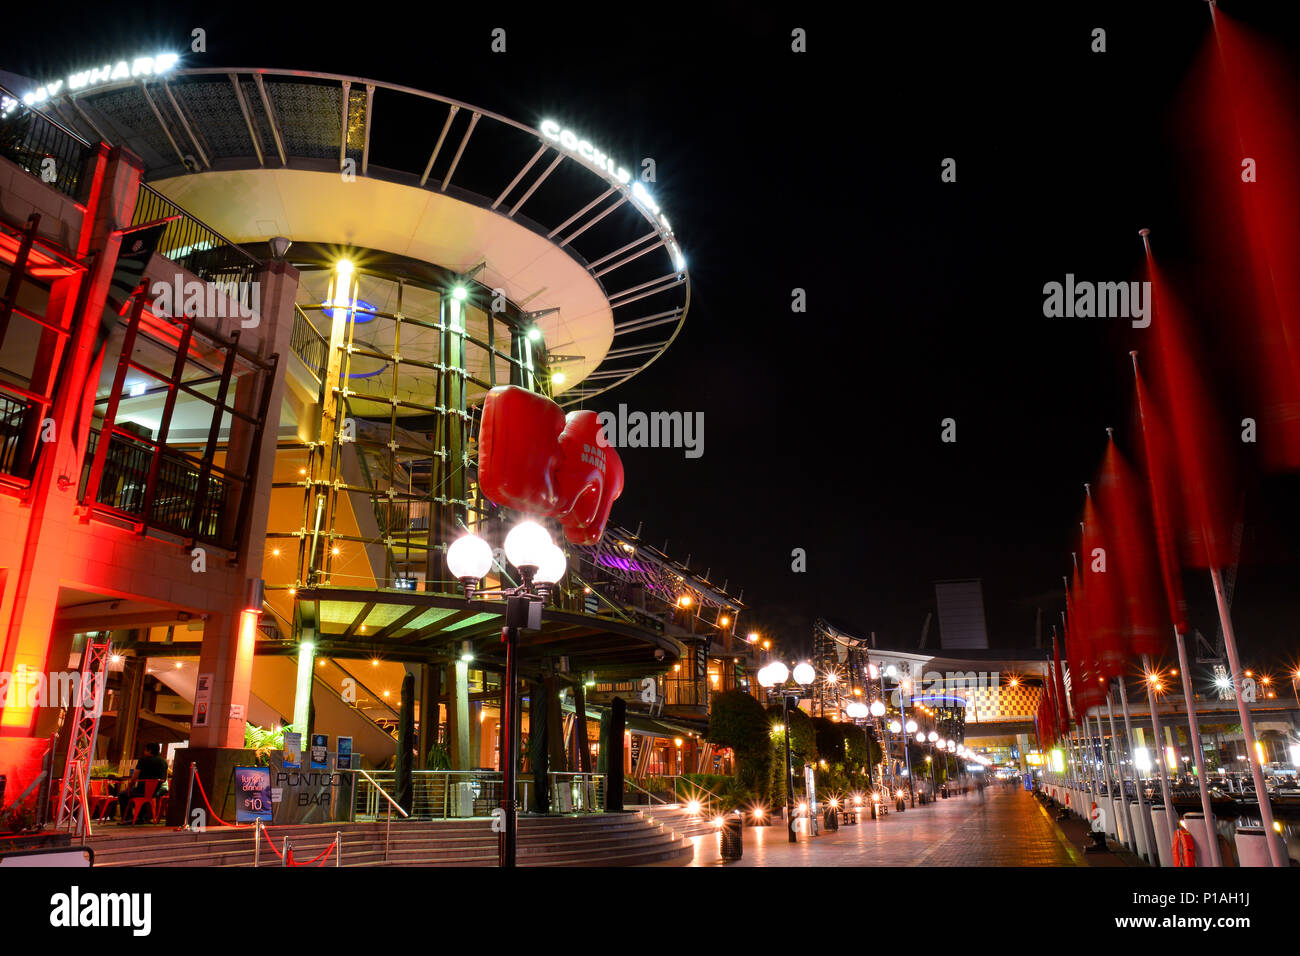 Darling Harbour at night time, Sydney, Australia Stock Photo